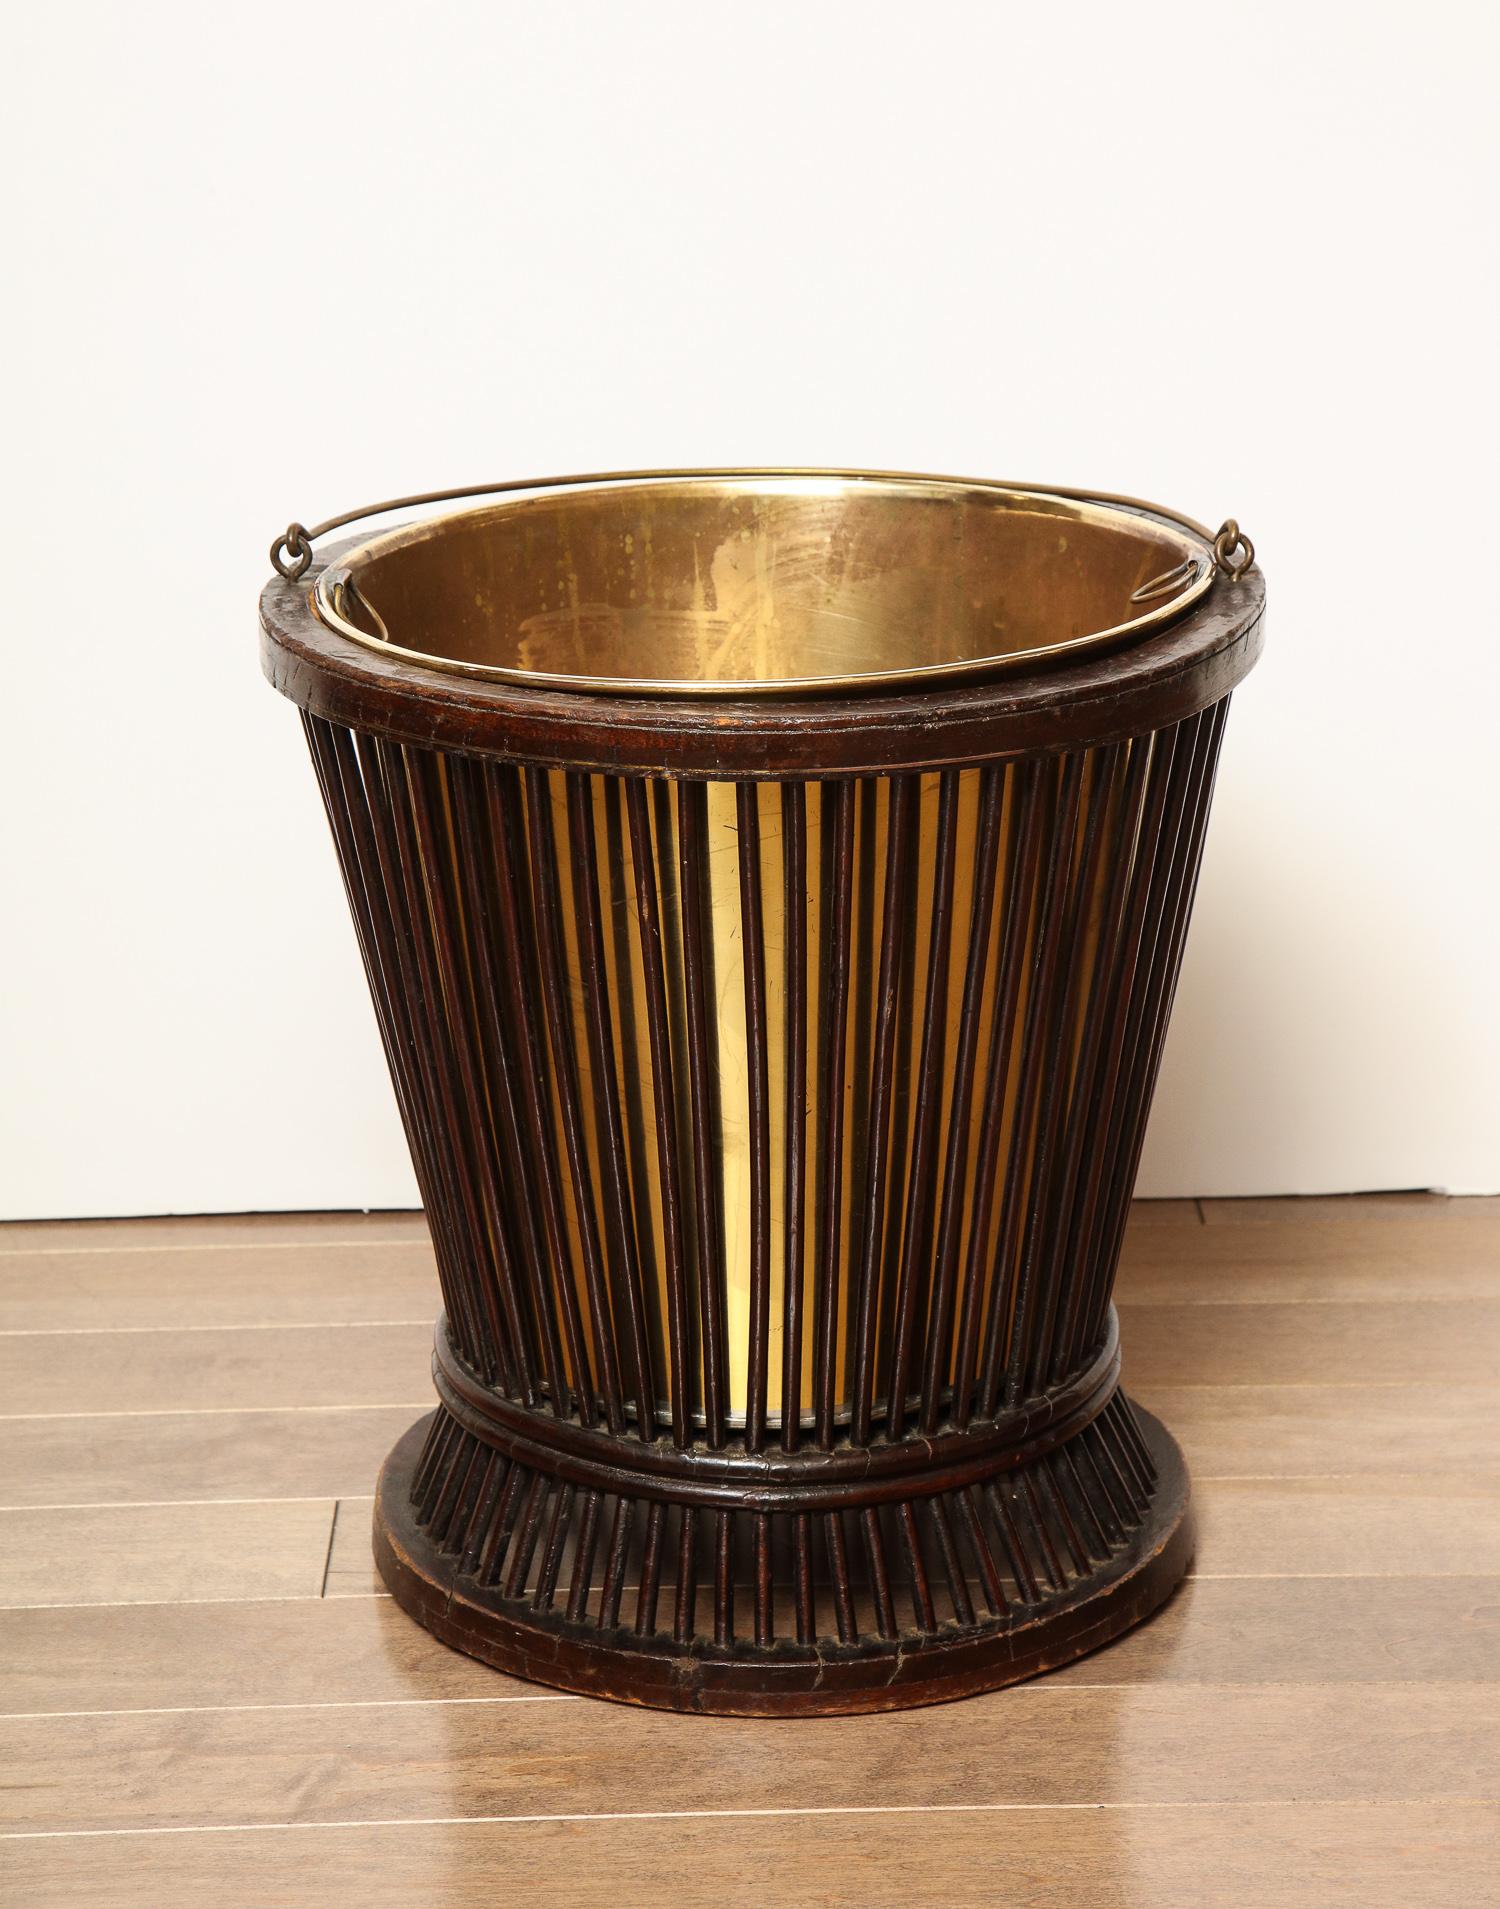 19th century mahogany and brass, waste paper basket.